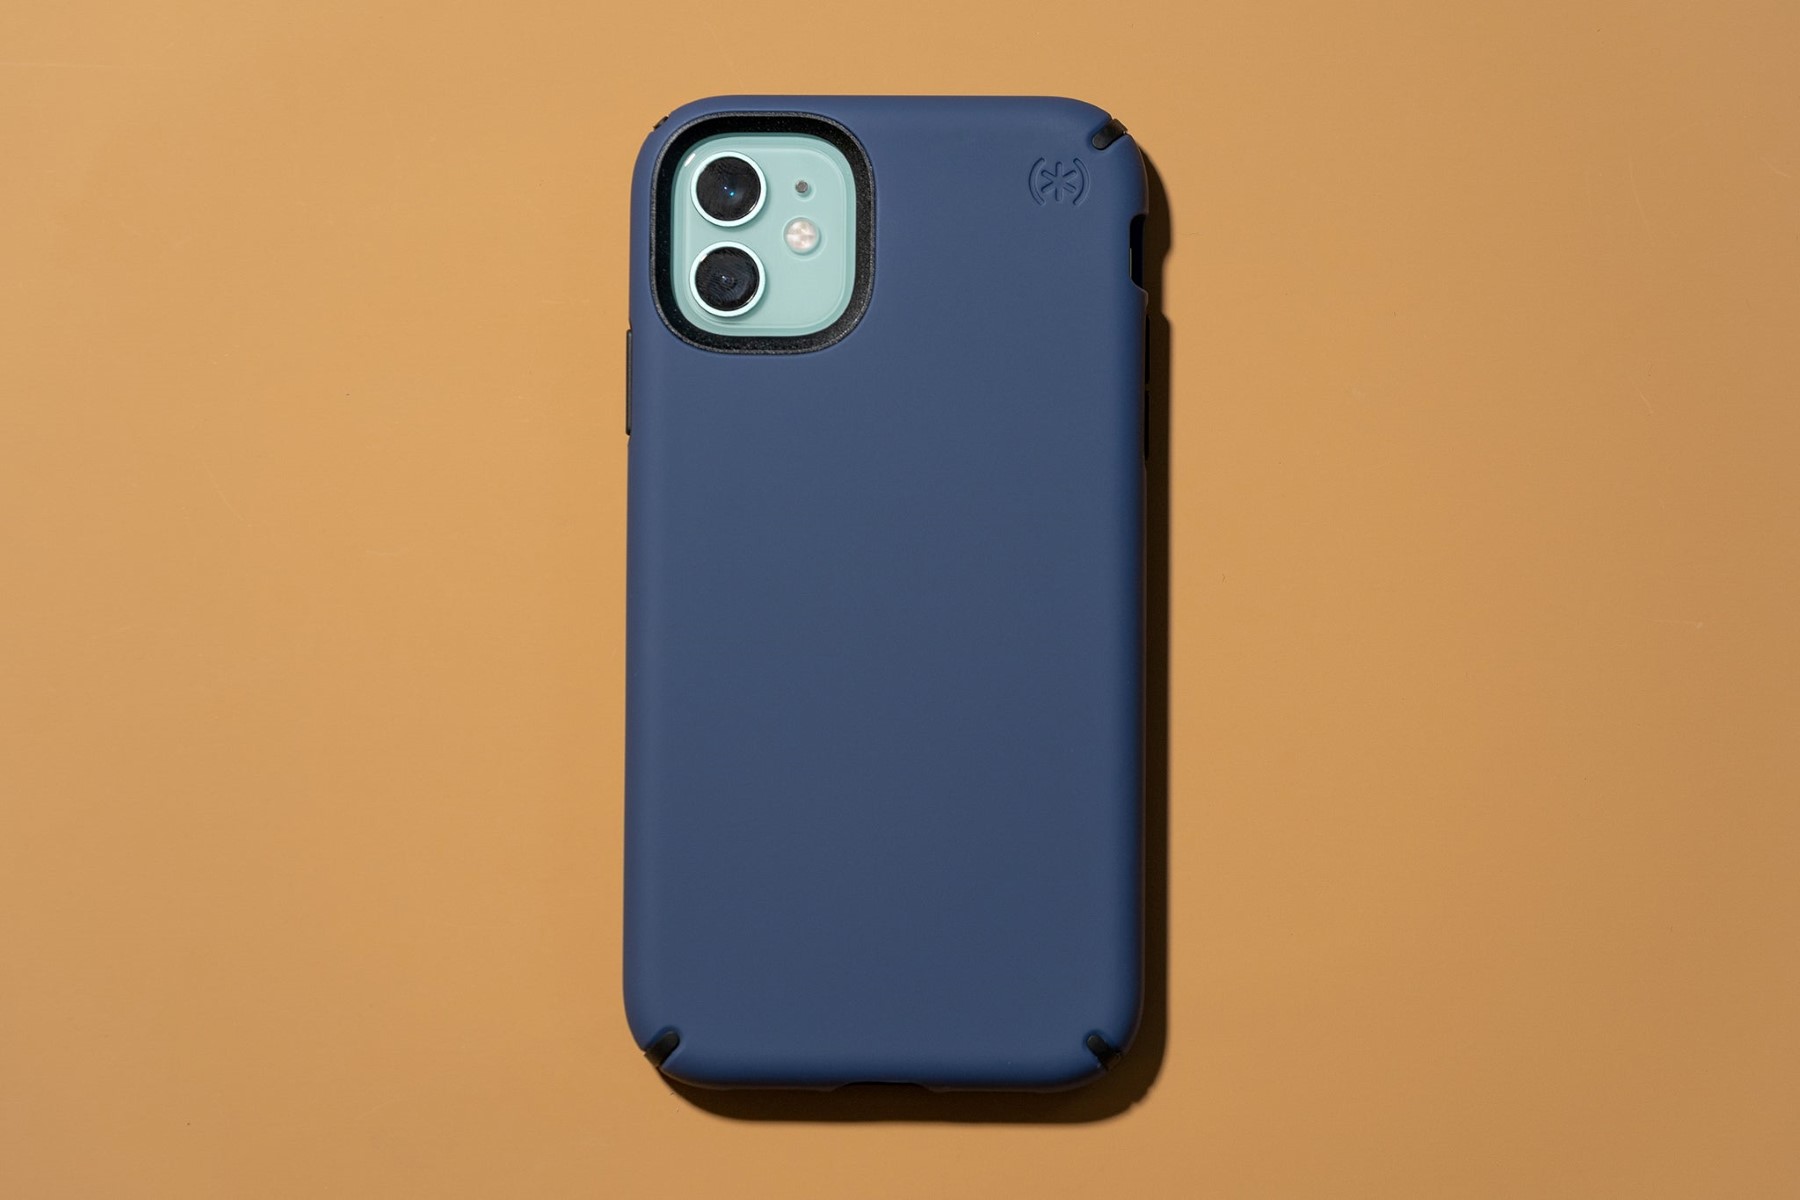 Case Compatibility: Finding Cases That Fit Your IPhone 11